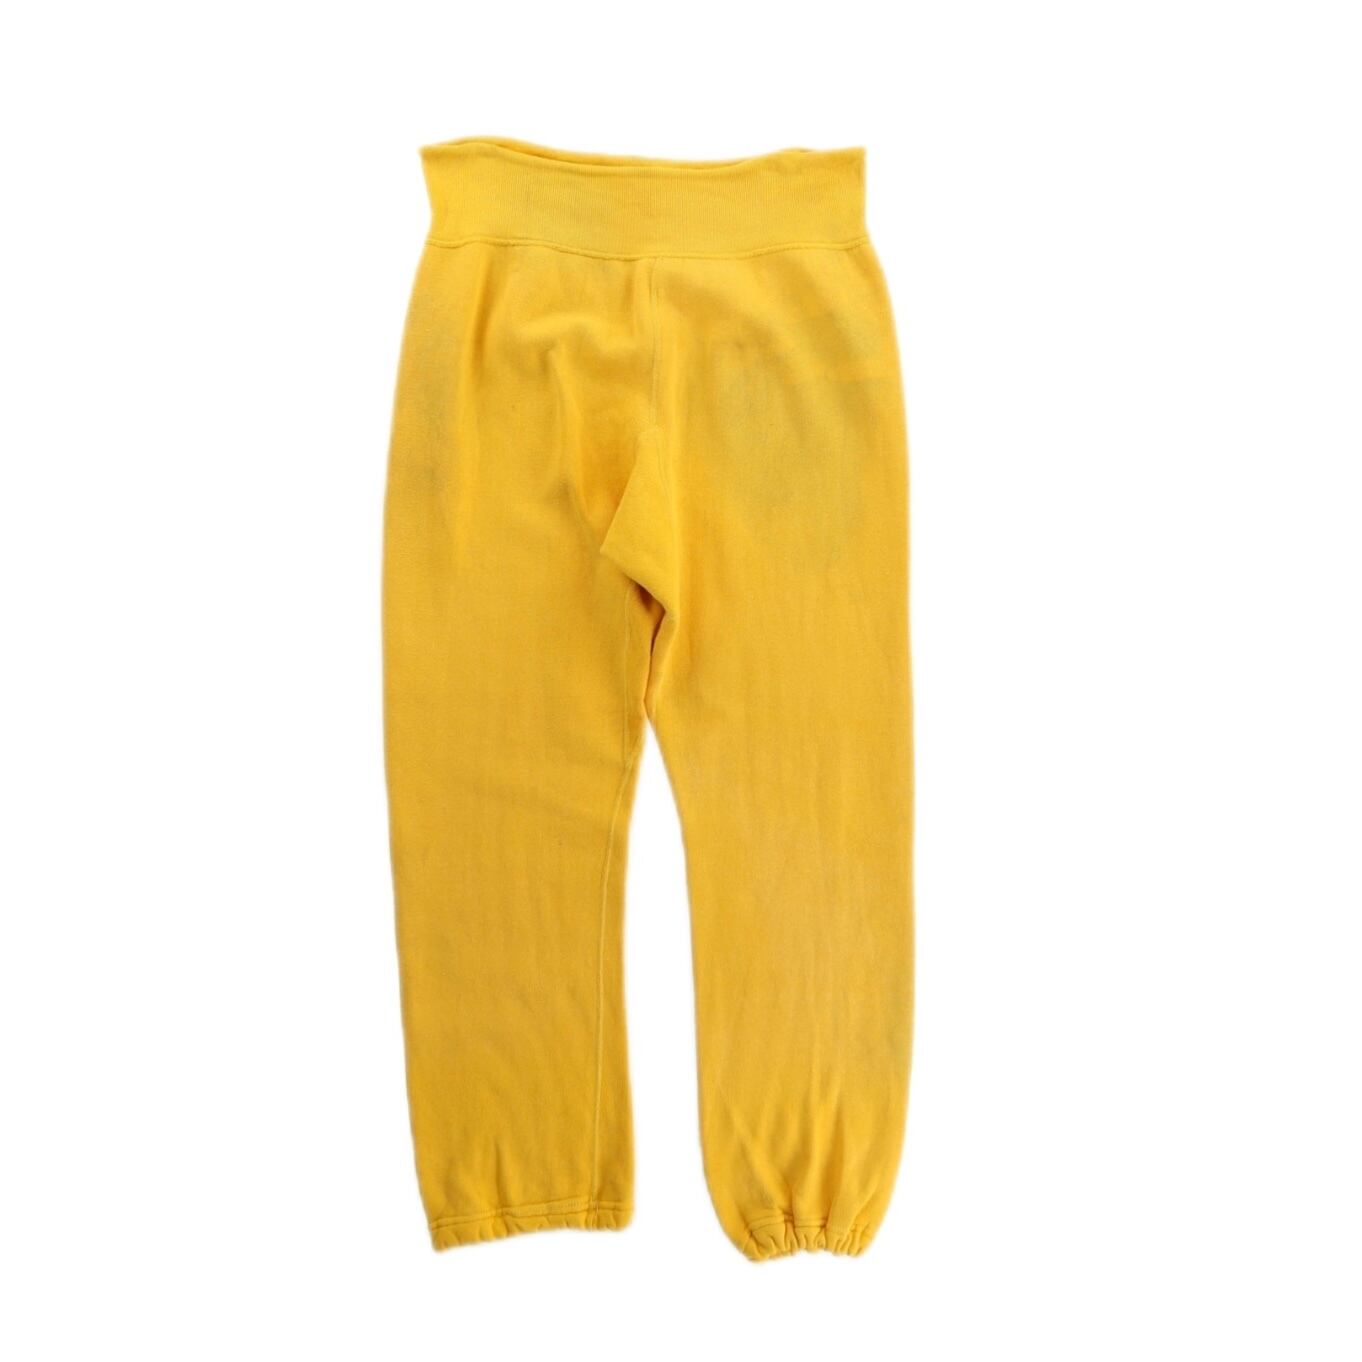 CUBA】~1980s vintage good damaged yellow sweat easy pant made in ...